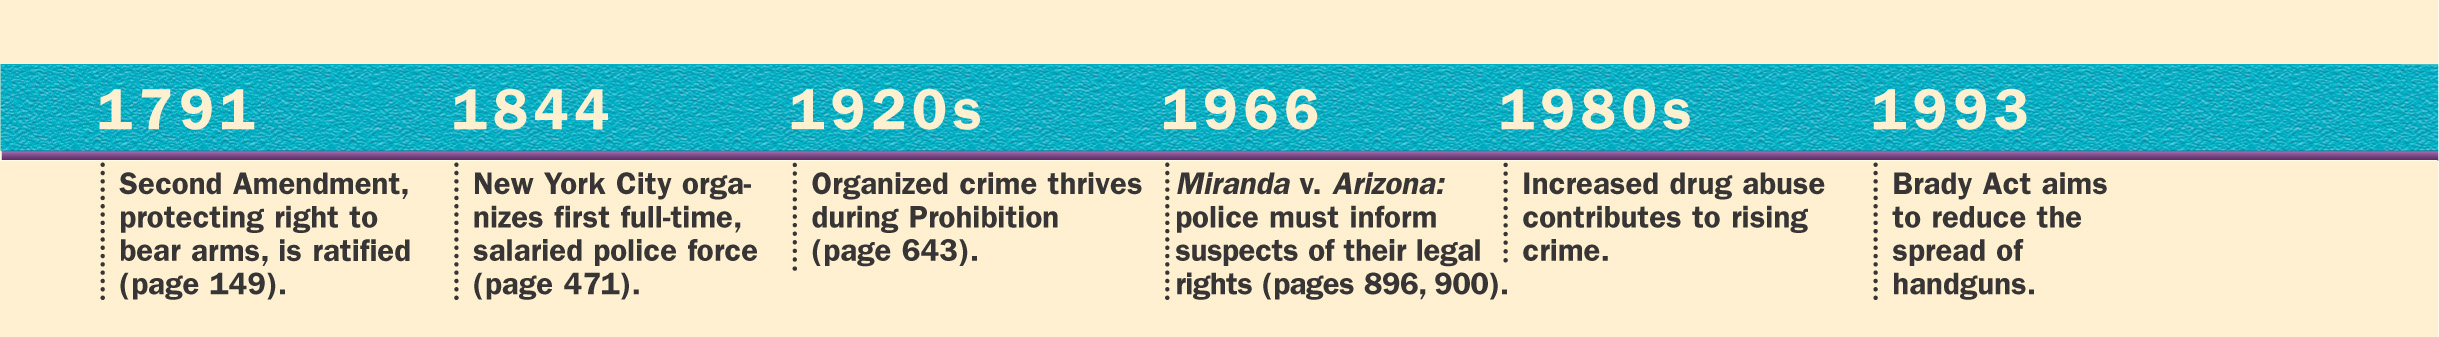 A timeline shows events in crime and public safety in the U.S. from 1791 to 2001.